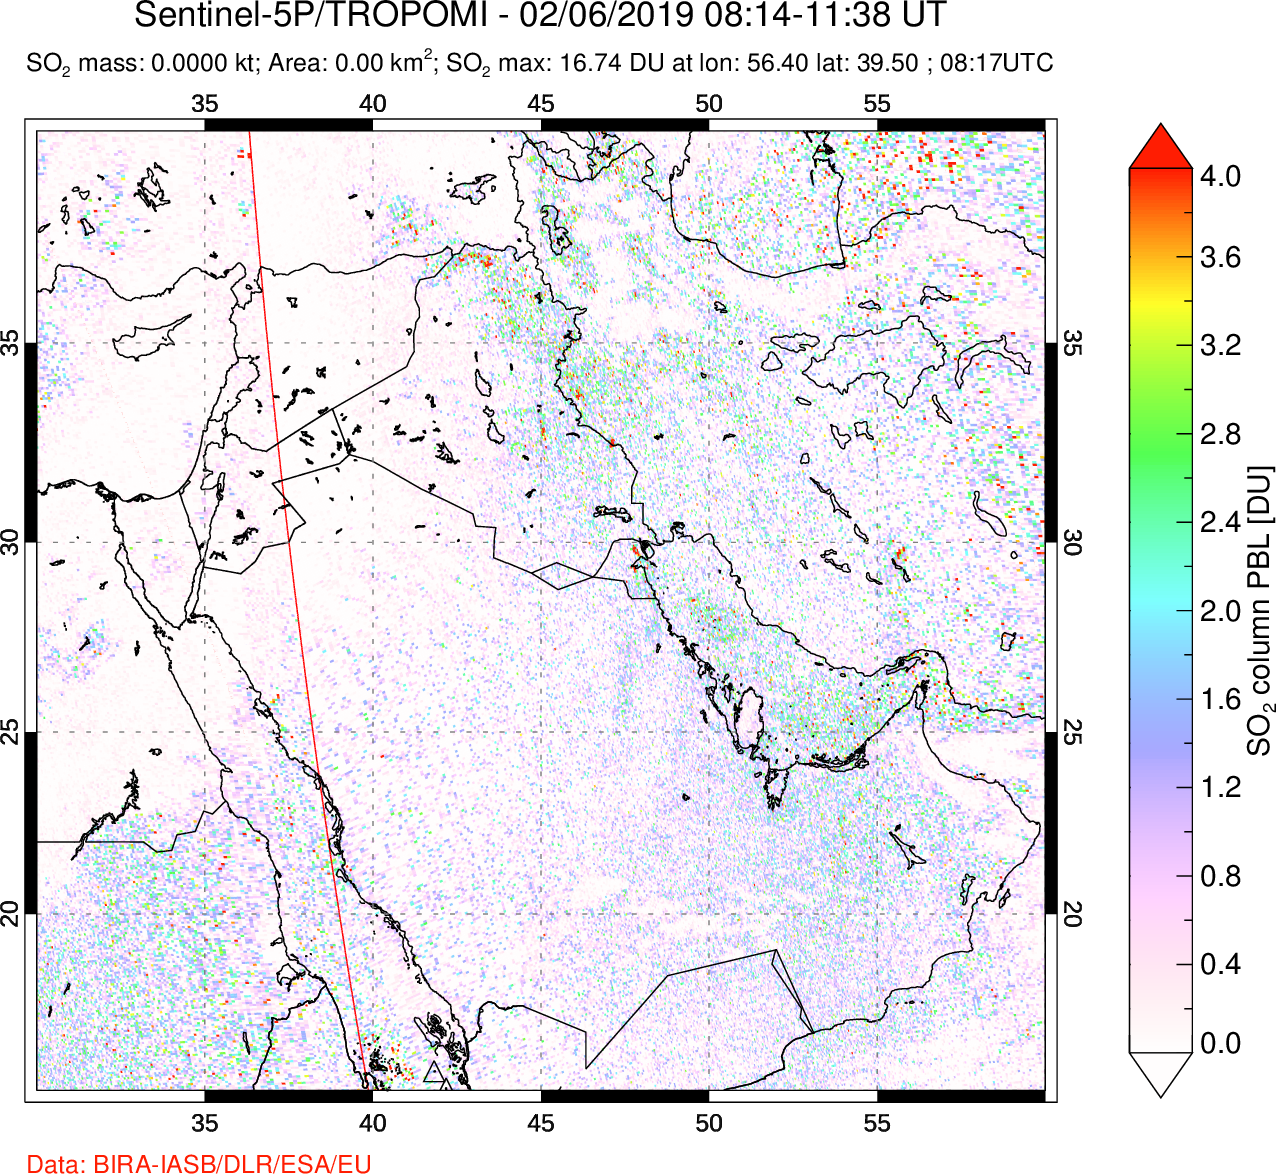 A sulfur dioxide image over Middle East on Feb 06, 2019.